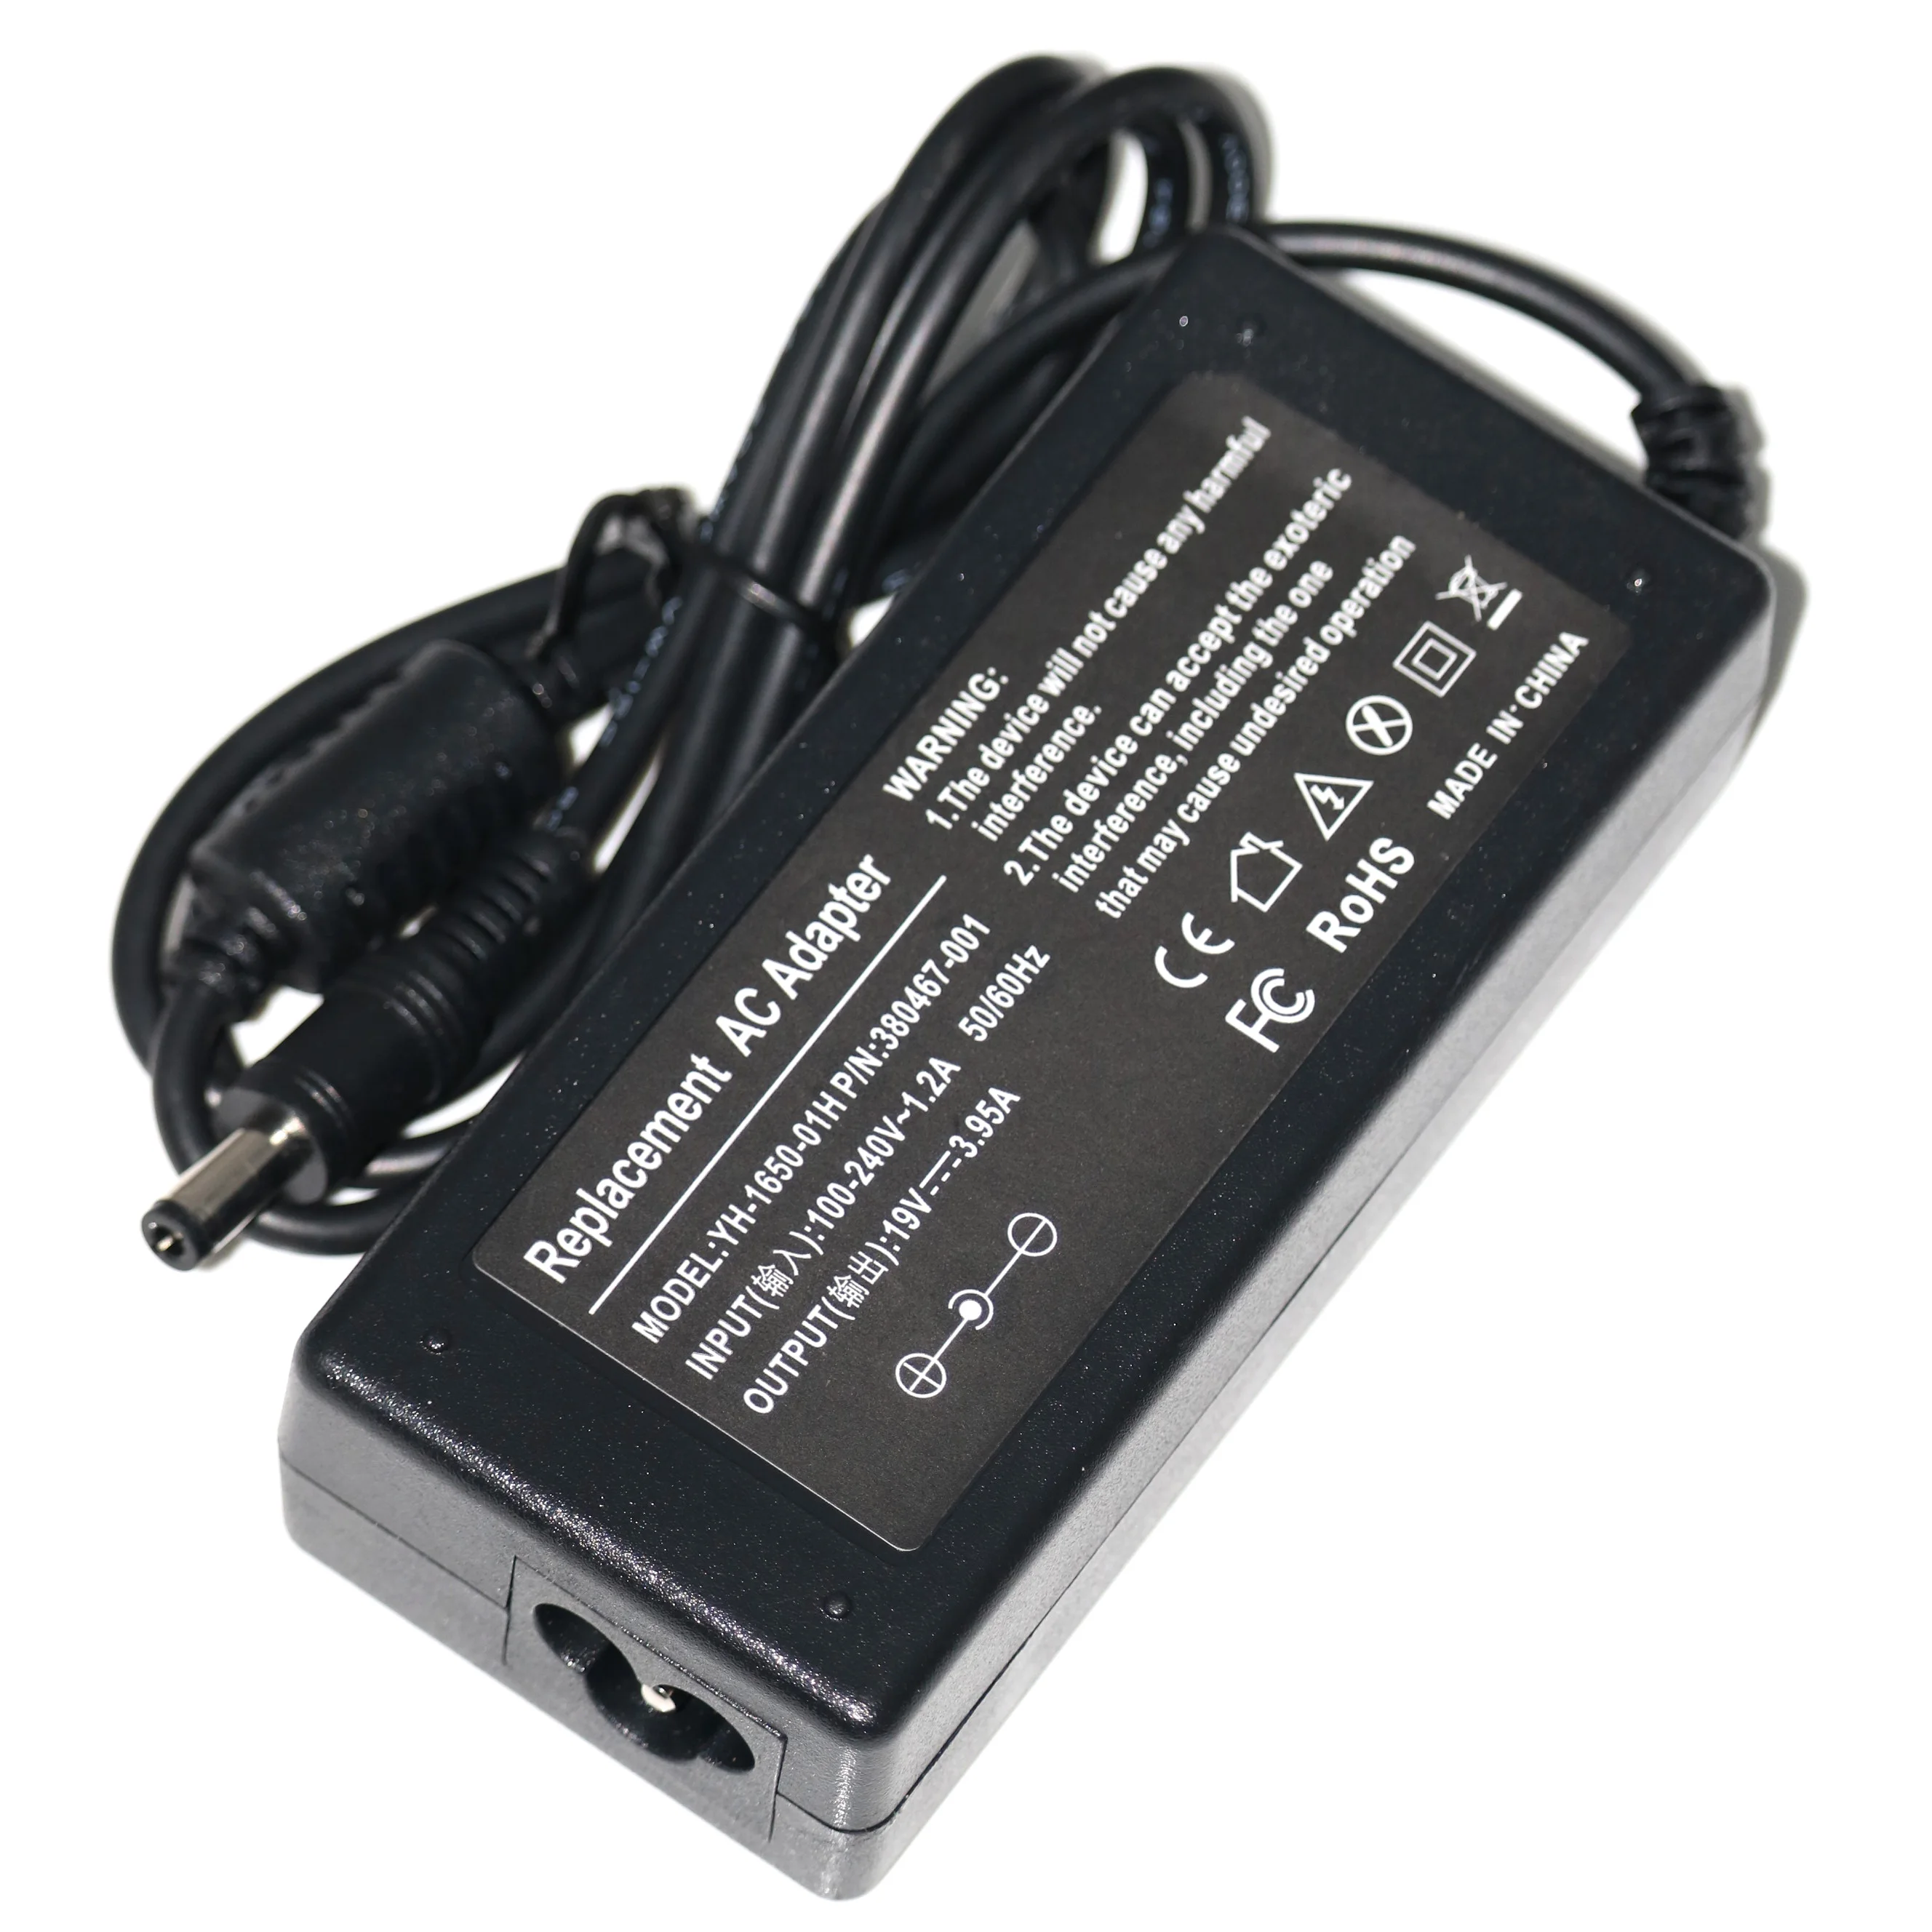 

19V 3.95A 75W AC Adapter Battery Charger With Power Cord for TOSHIBA Satellite L650D L650 L655 L655D L670 C650D Laptop